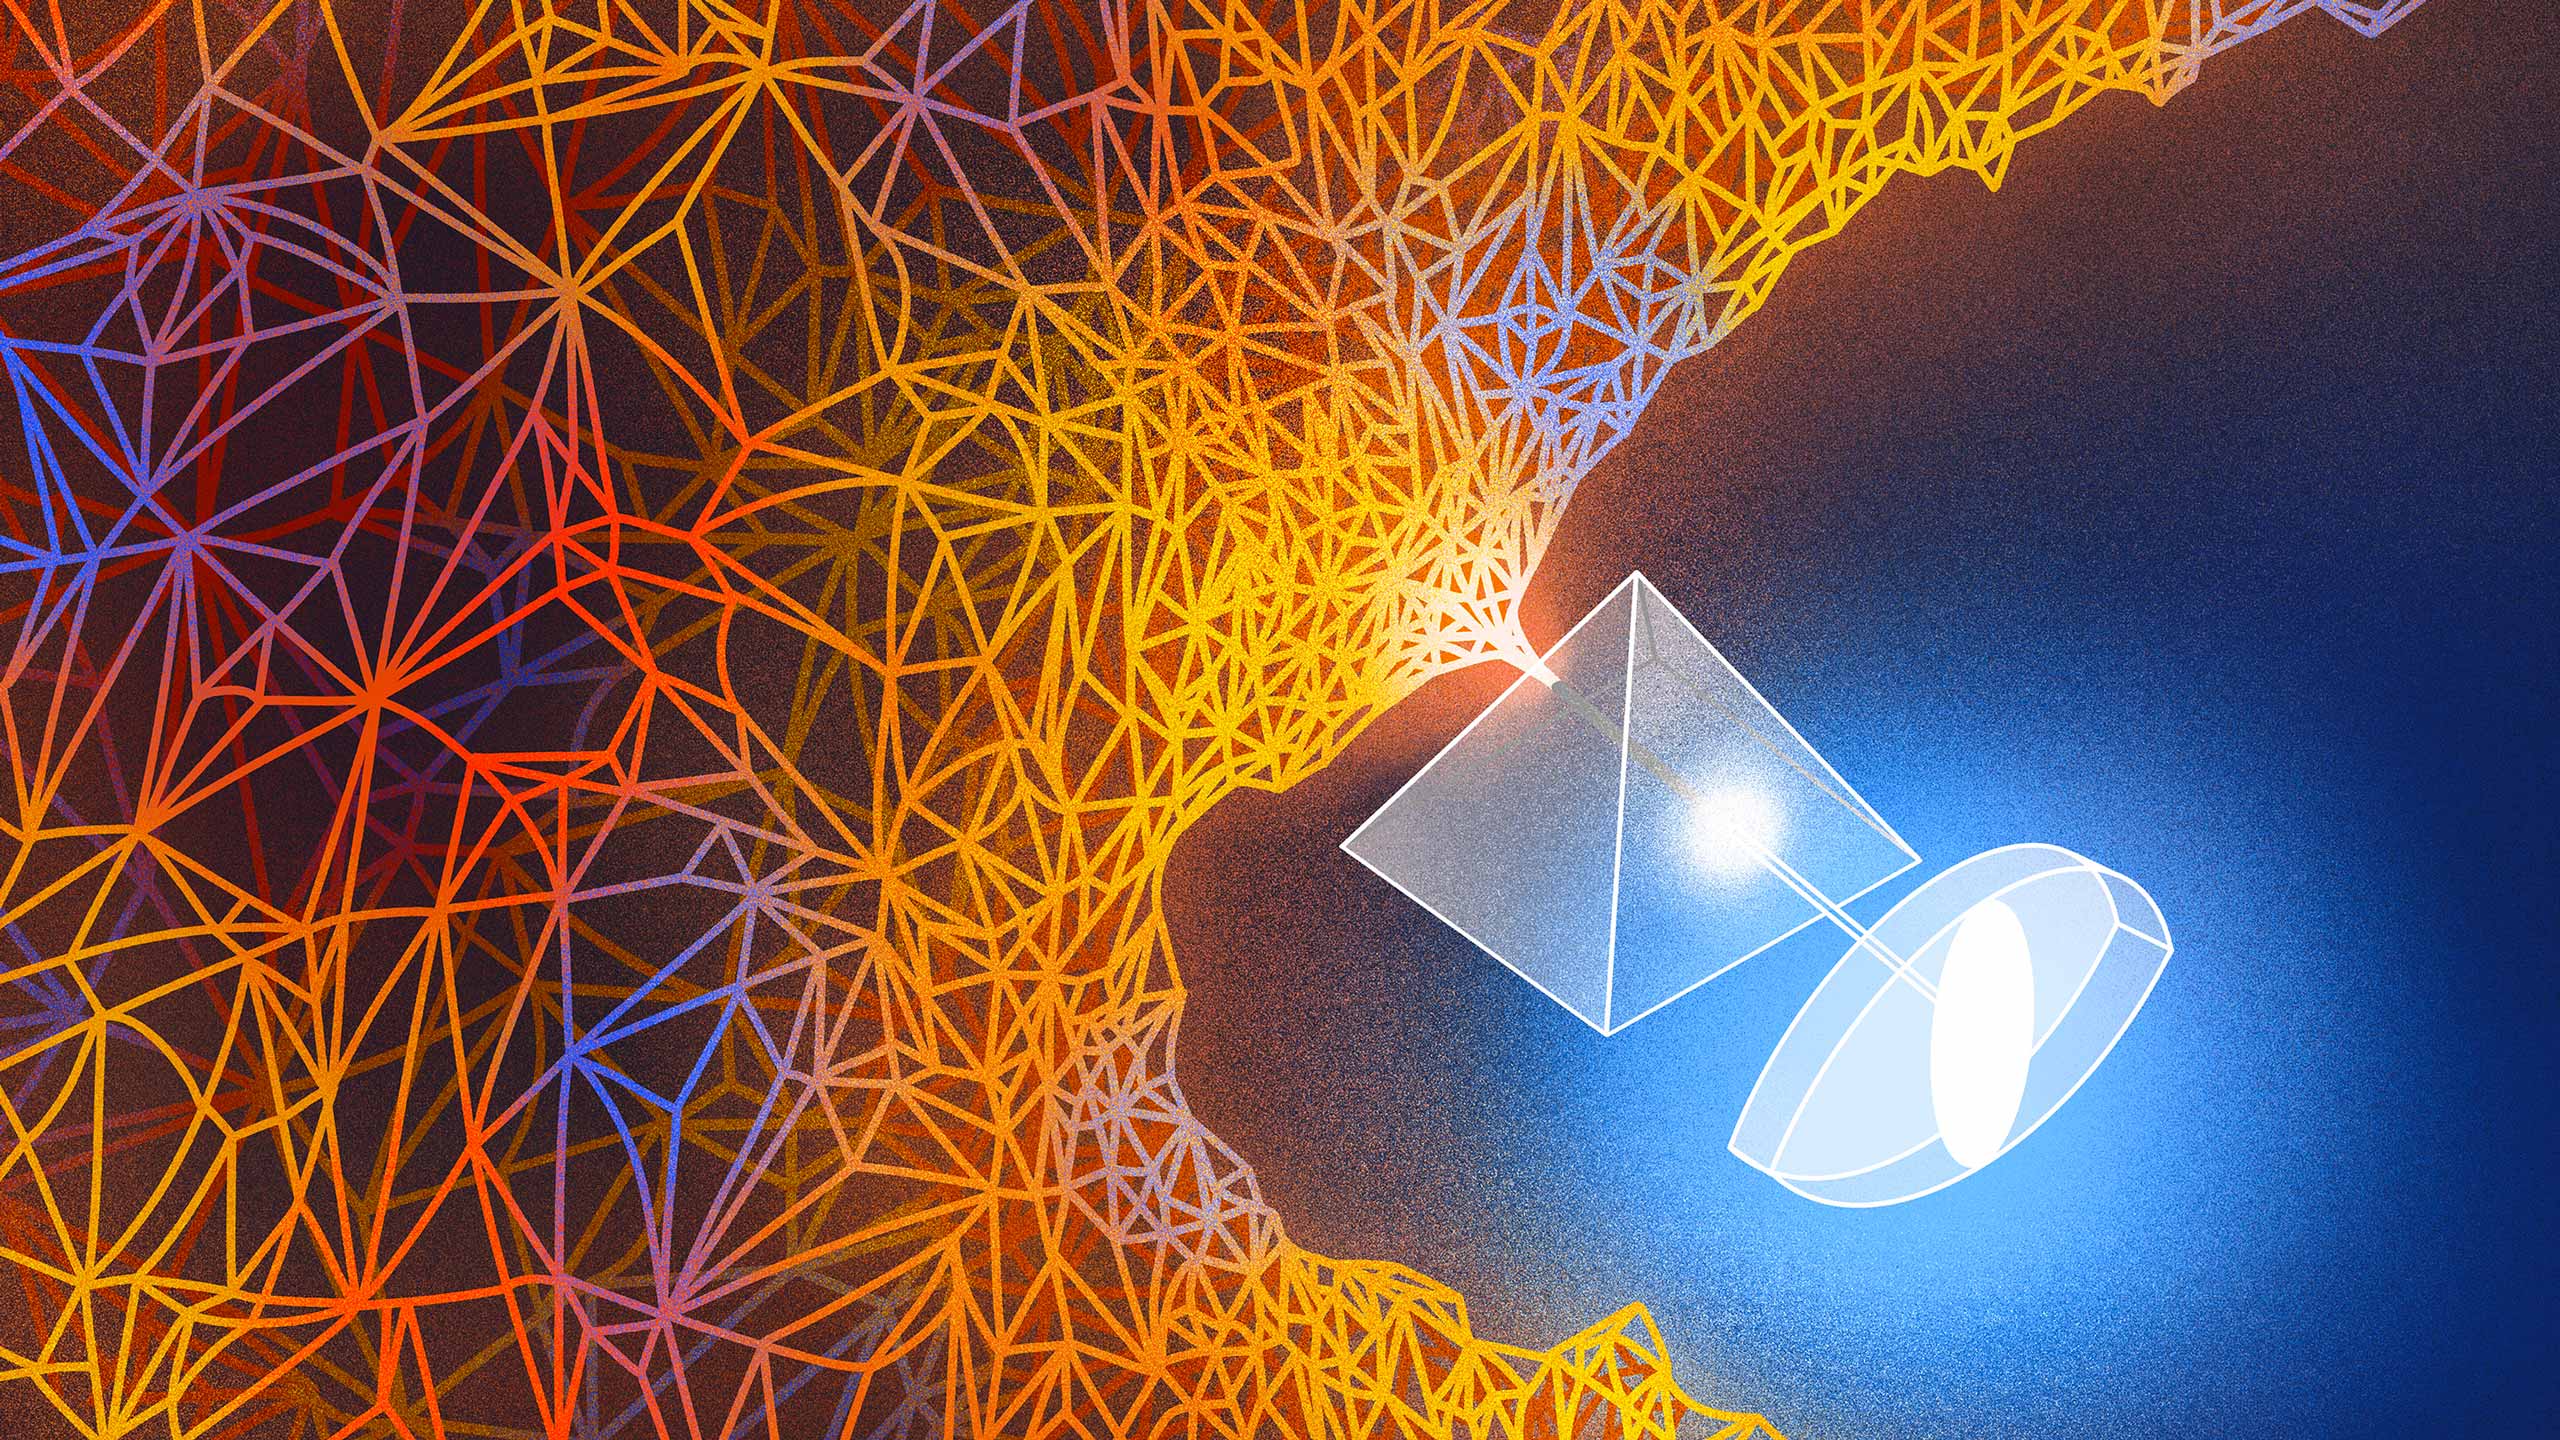 An illustration showing an orange and blue network of lines focus into a clear pyramid, emerging as a white light traveling into a clear eye.